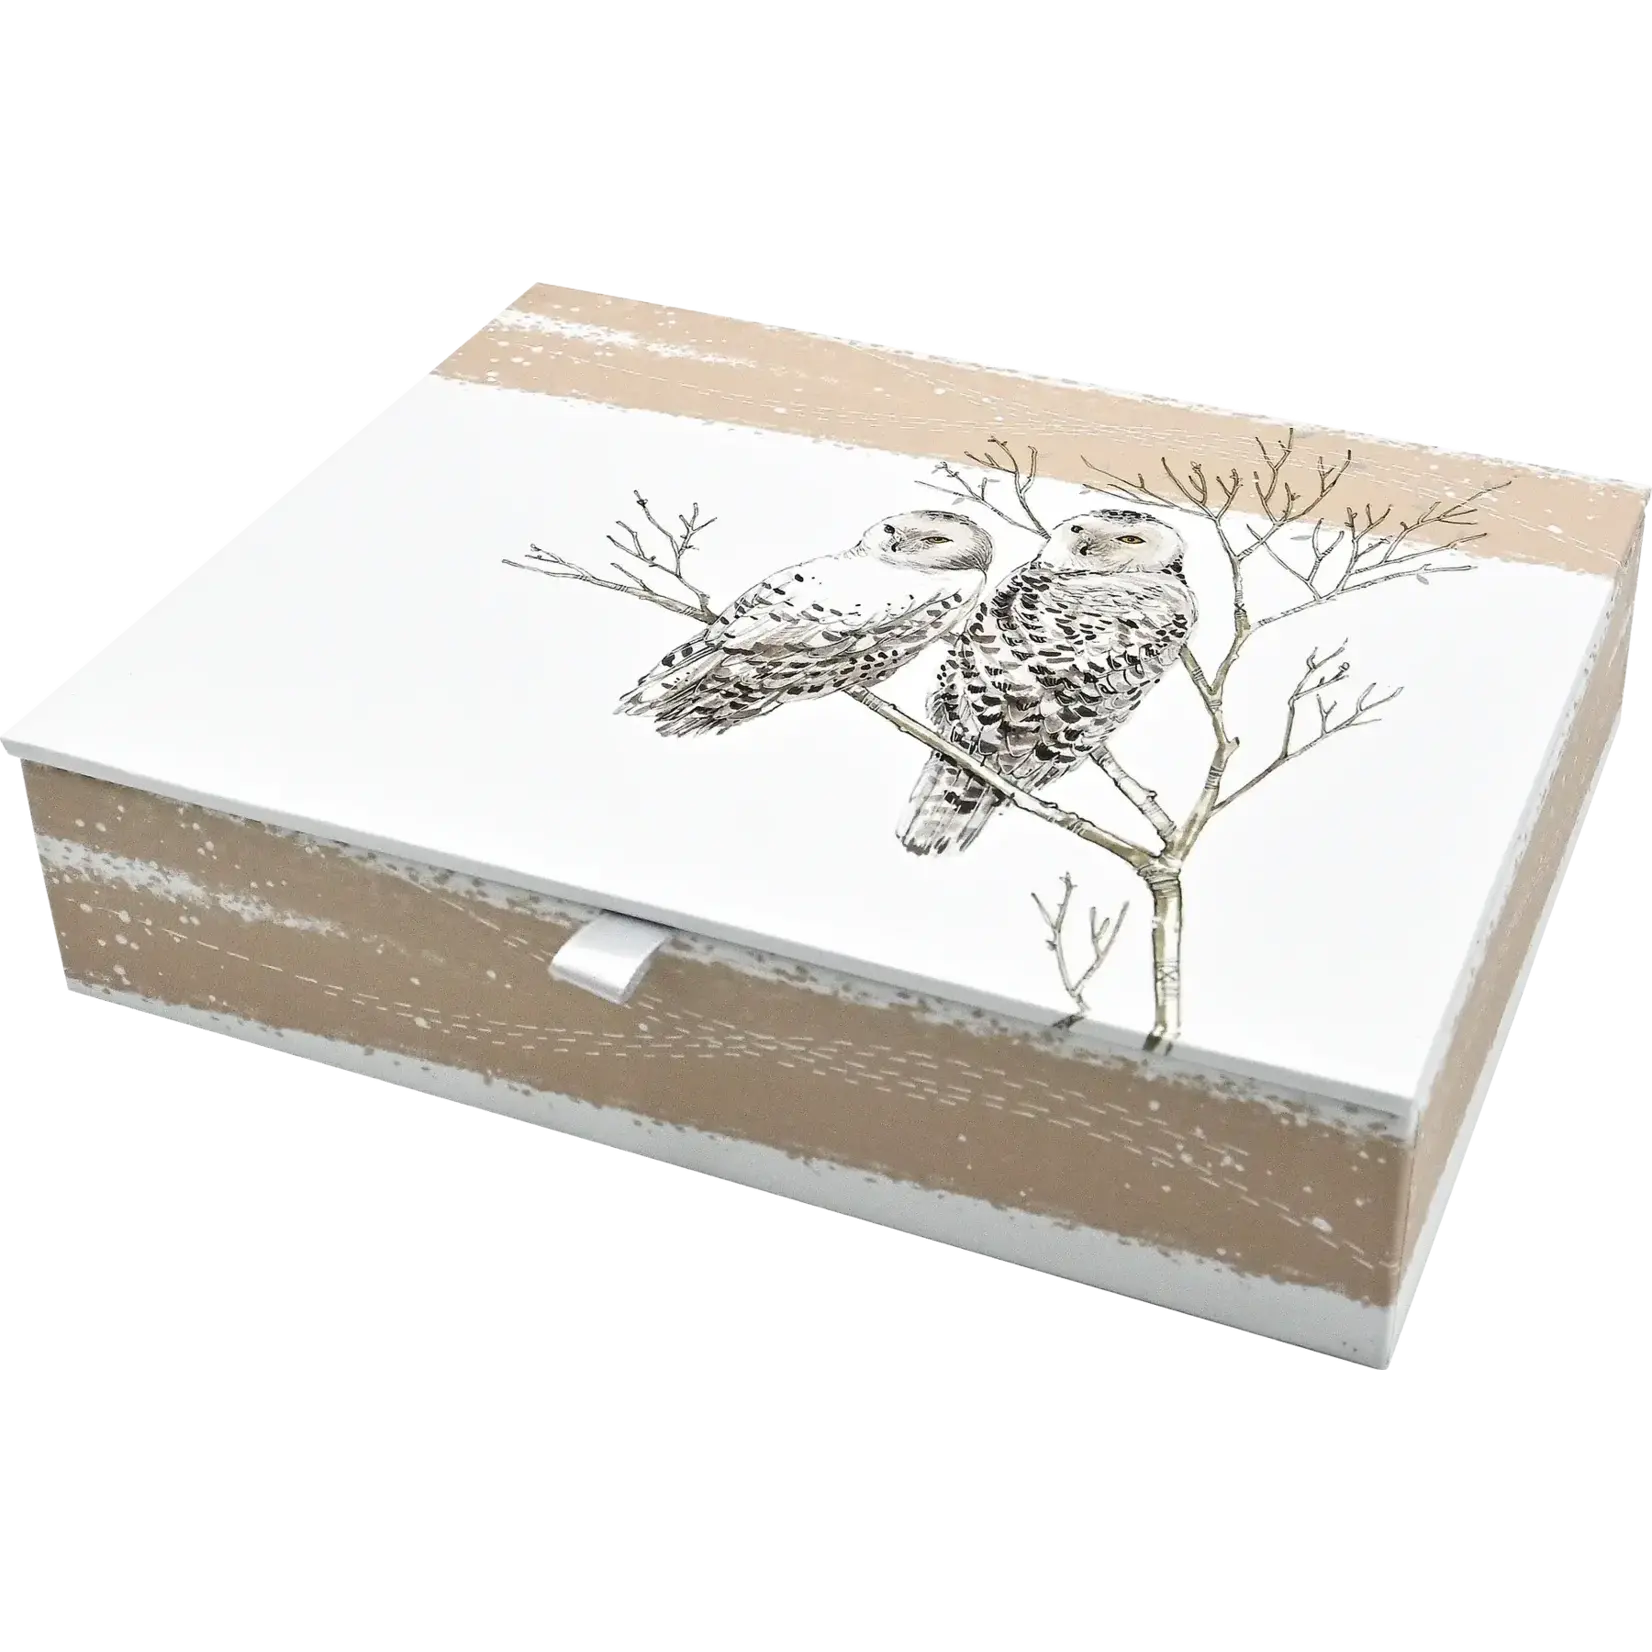 Peter Pauper Press Snowy Owls Deluxe Boxed Holiday Cards